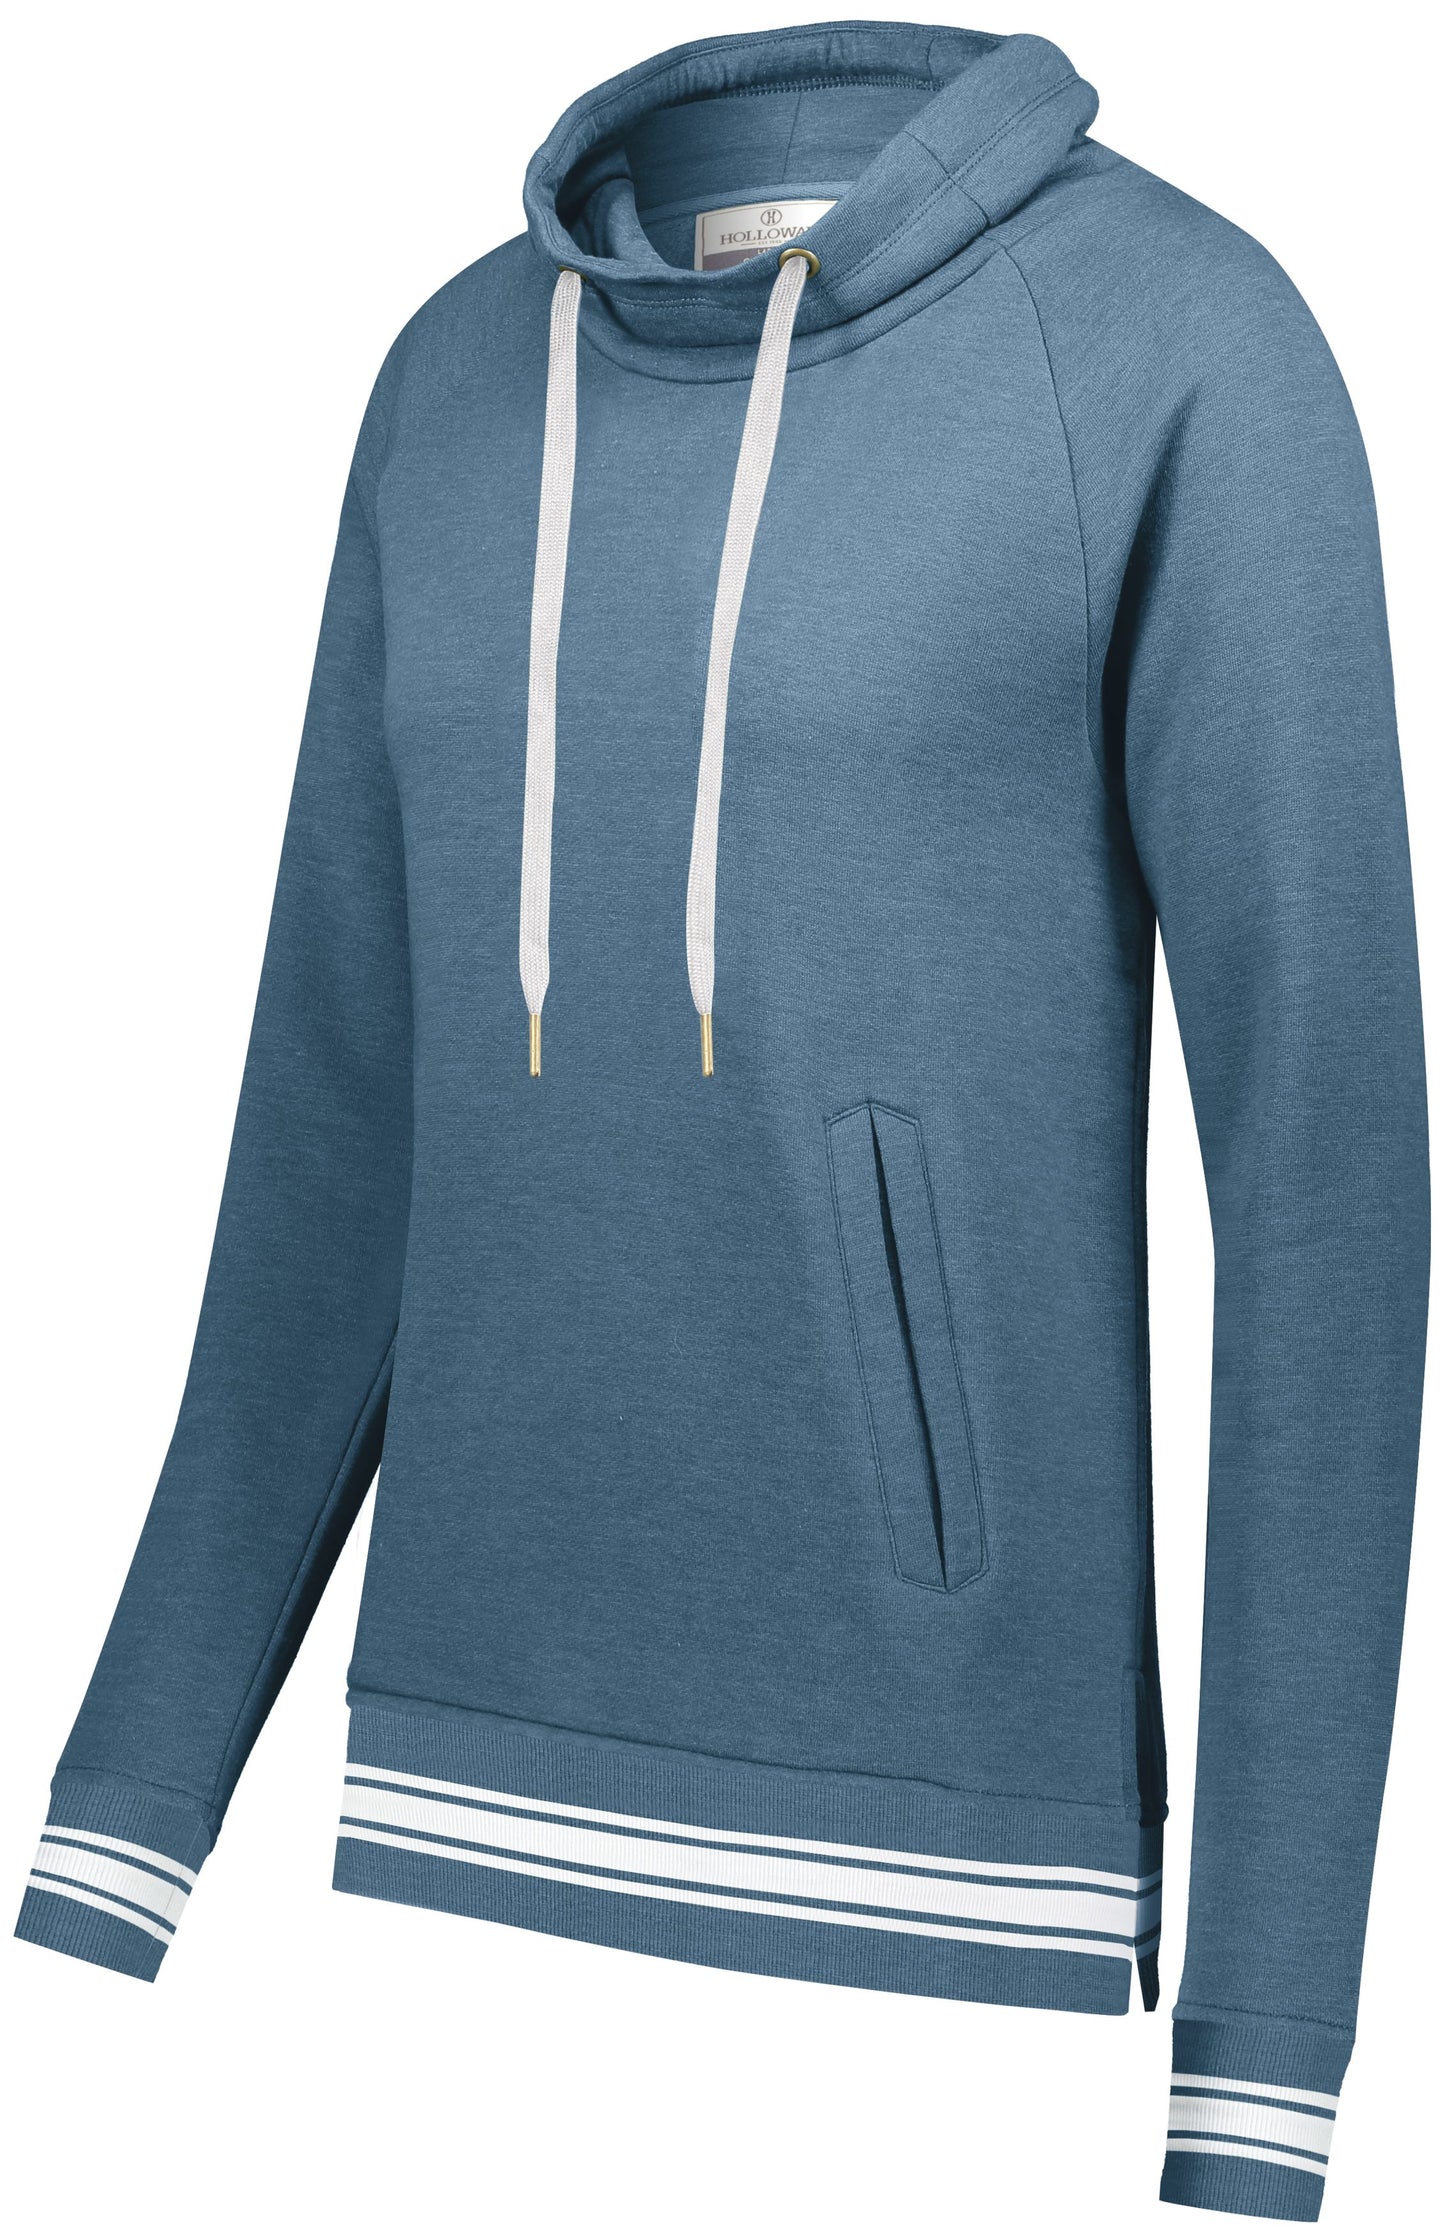 HOLLOWAY - LADIES IVY LEAGUE FUNNEL NECK PULLOVER